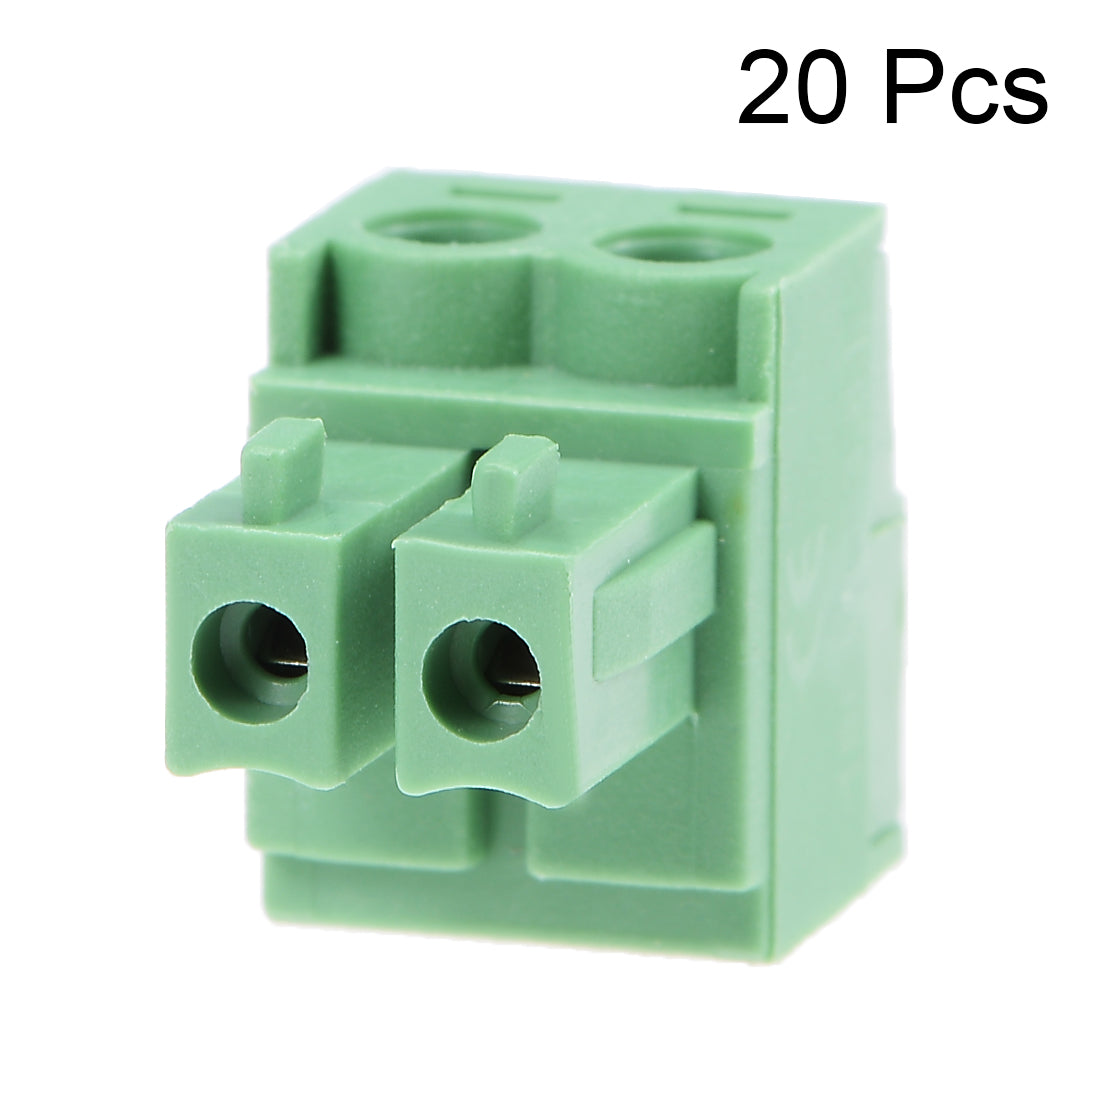 uxcell Uxcell 20Pcs AC300V 10A 3.81mm Pitch 2P Flat Angle Needle Seat Insert-In PCB Terminal Block Connector green